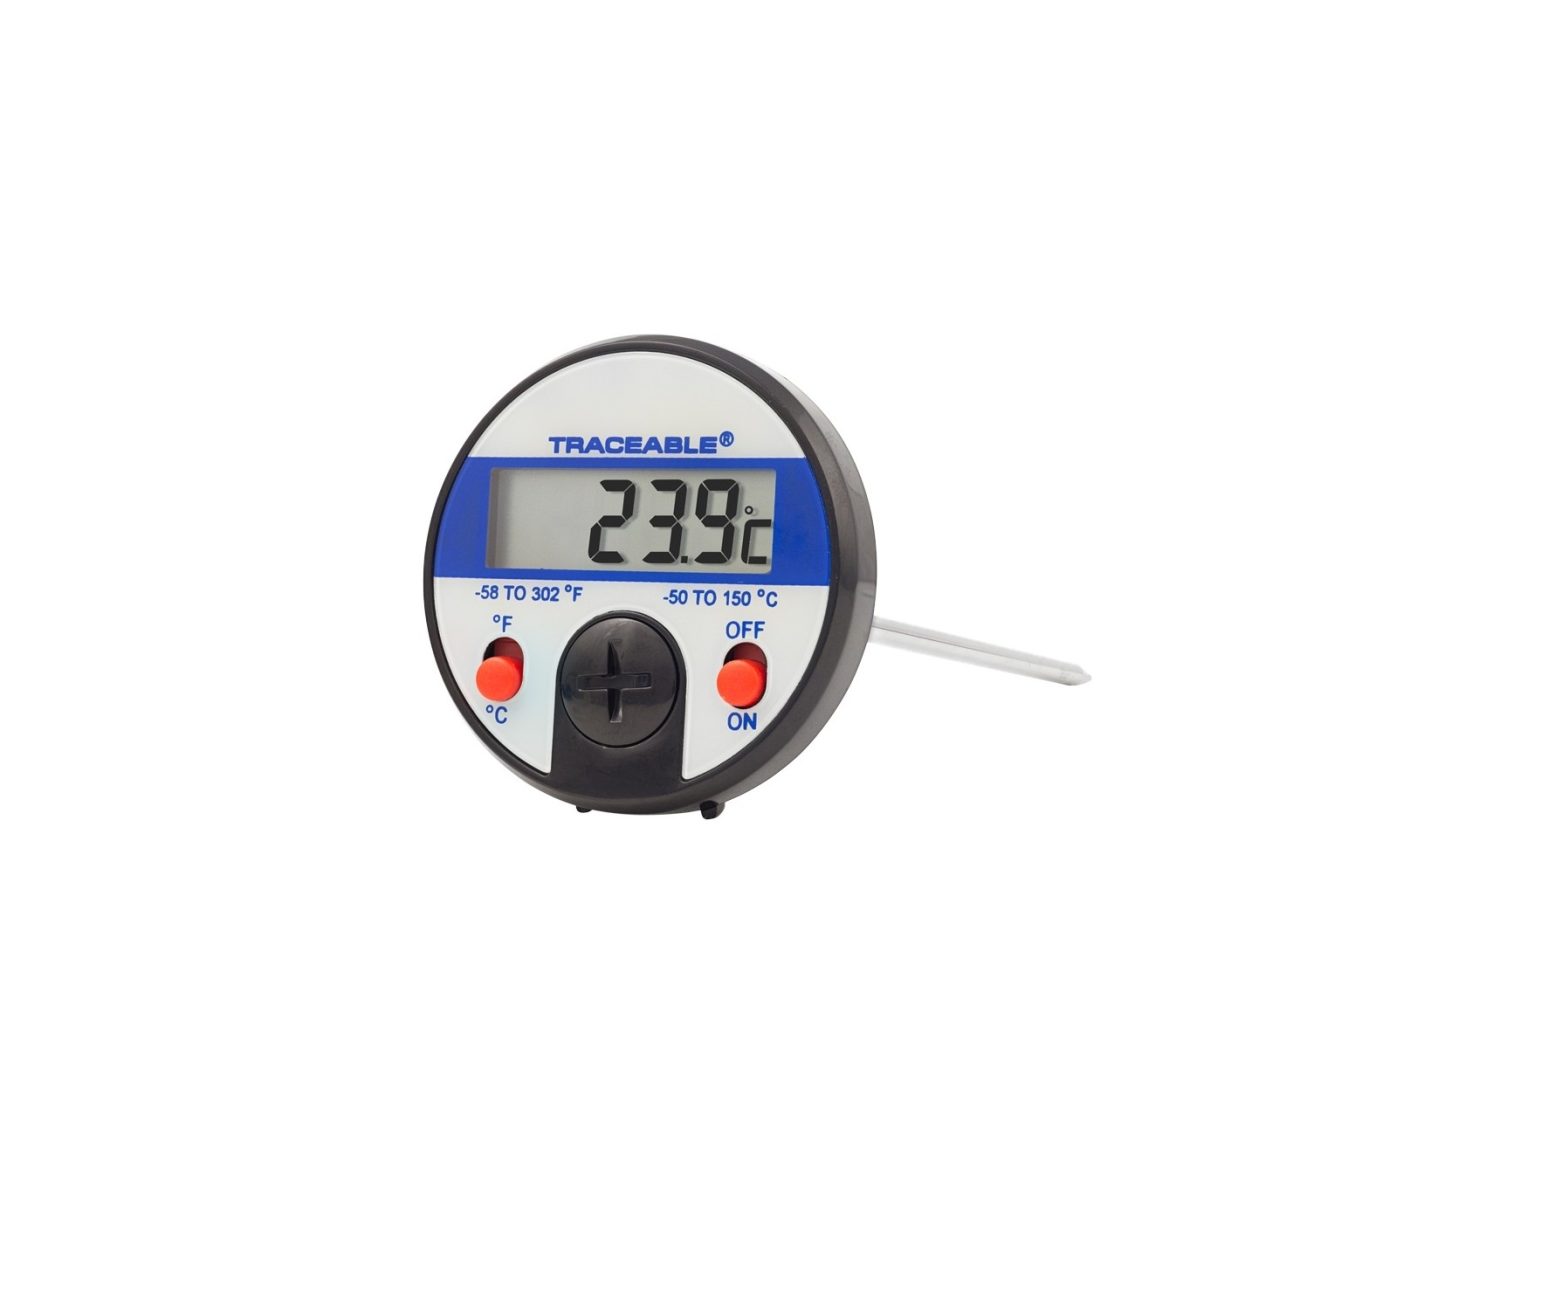 TRACEABLE Jumbo Display Dial Thermometer Instructions